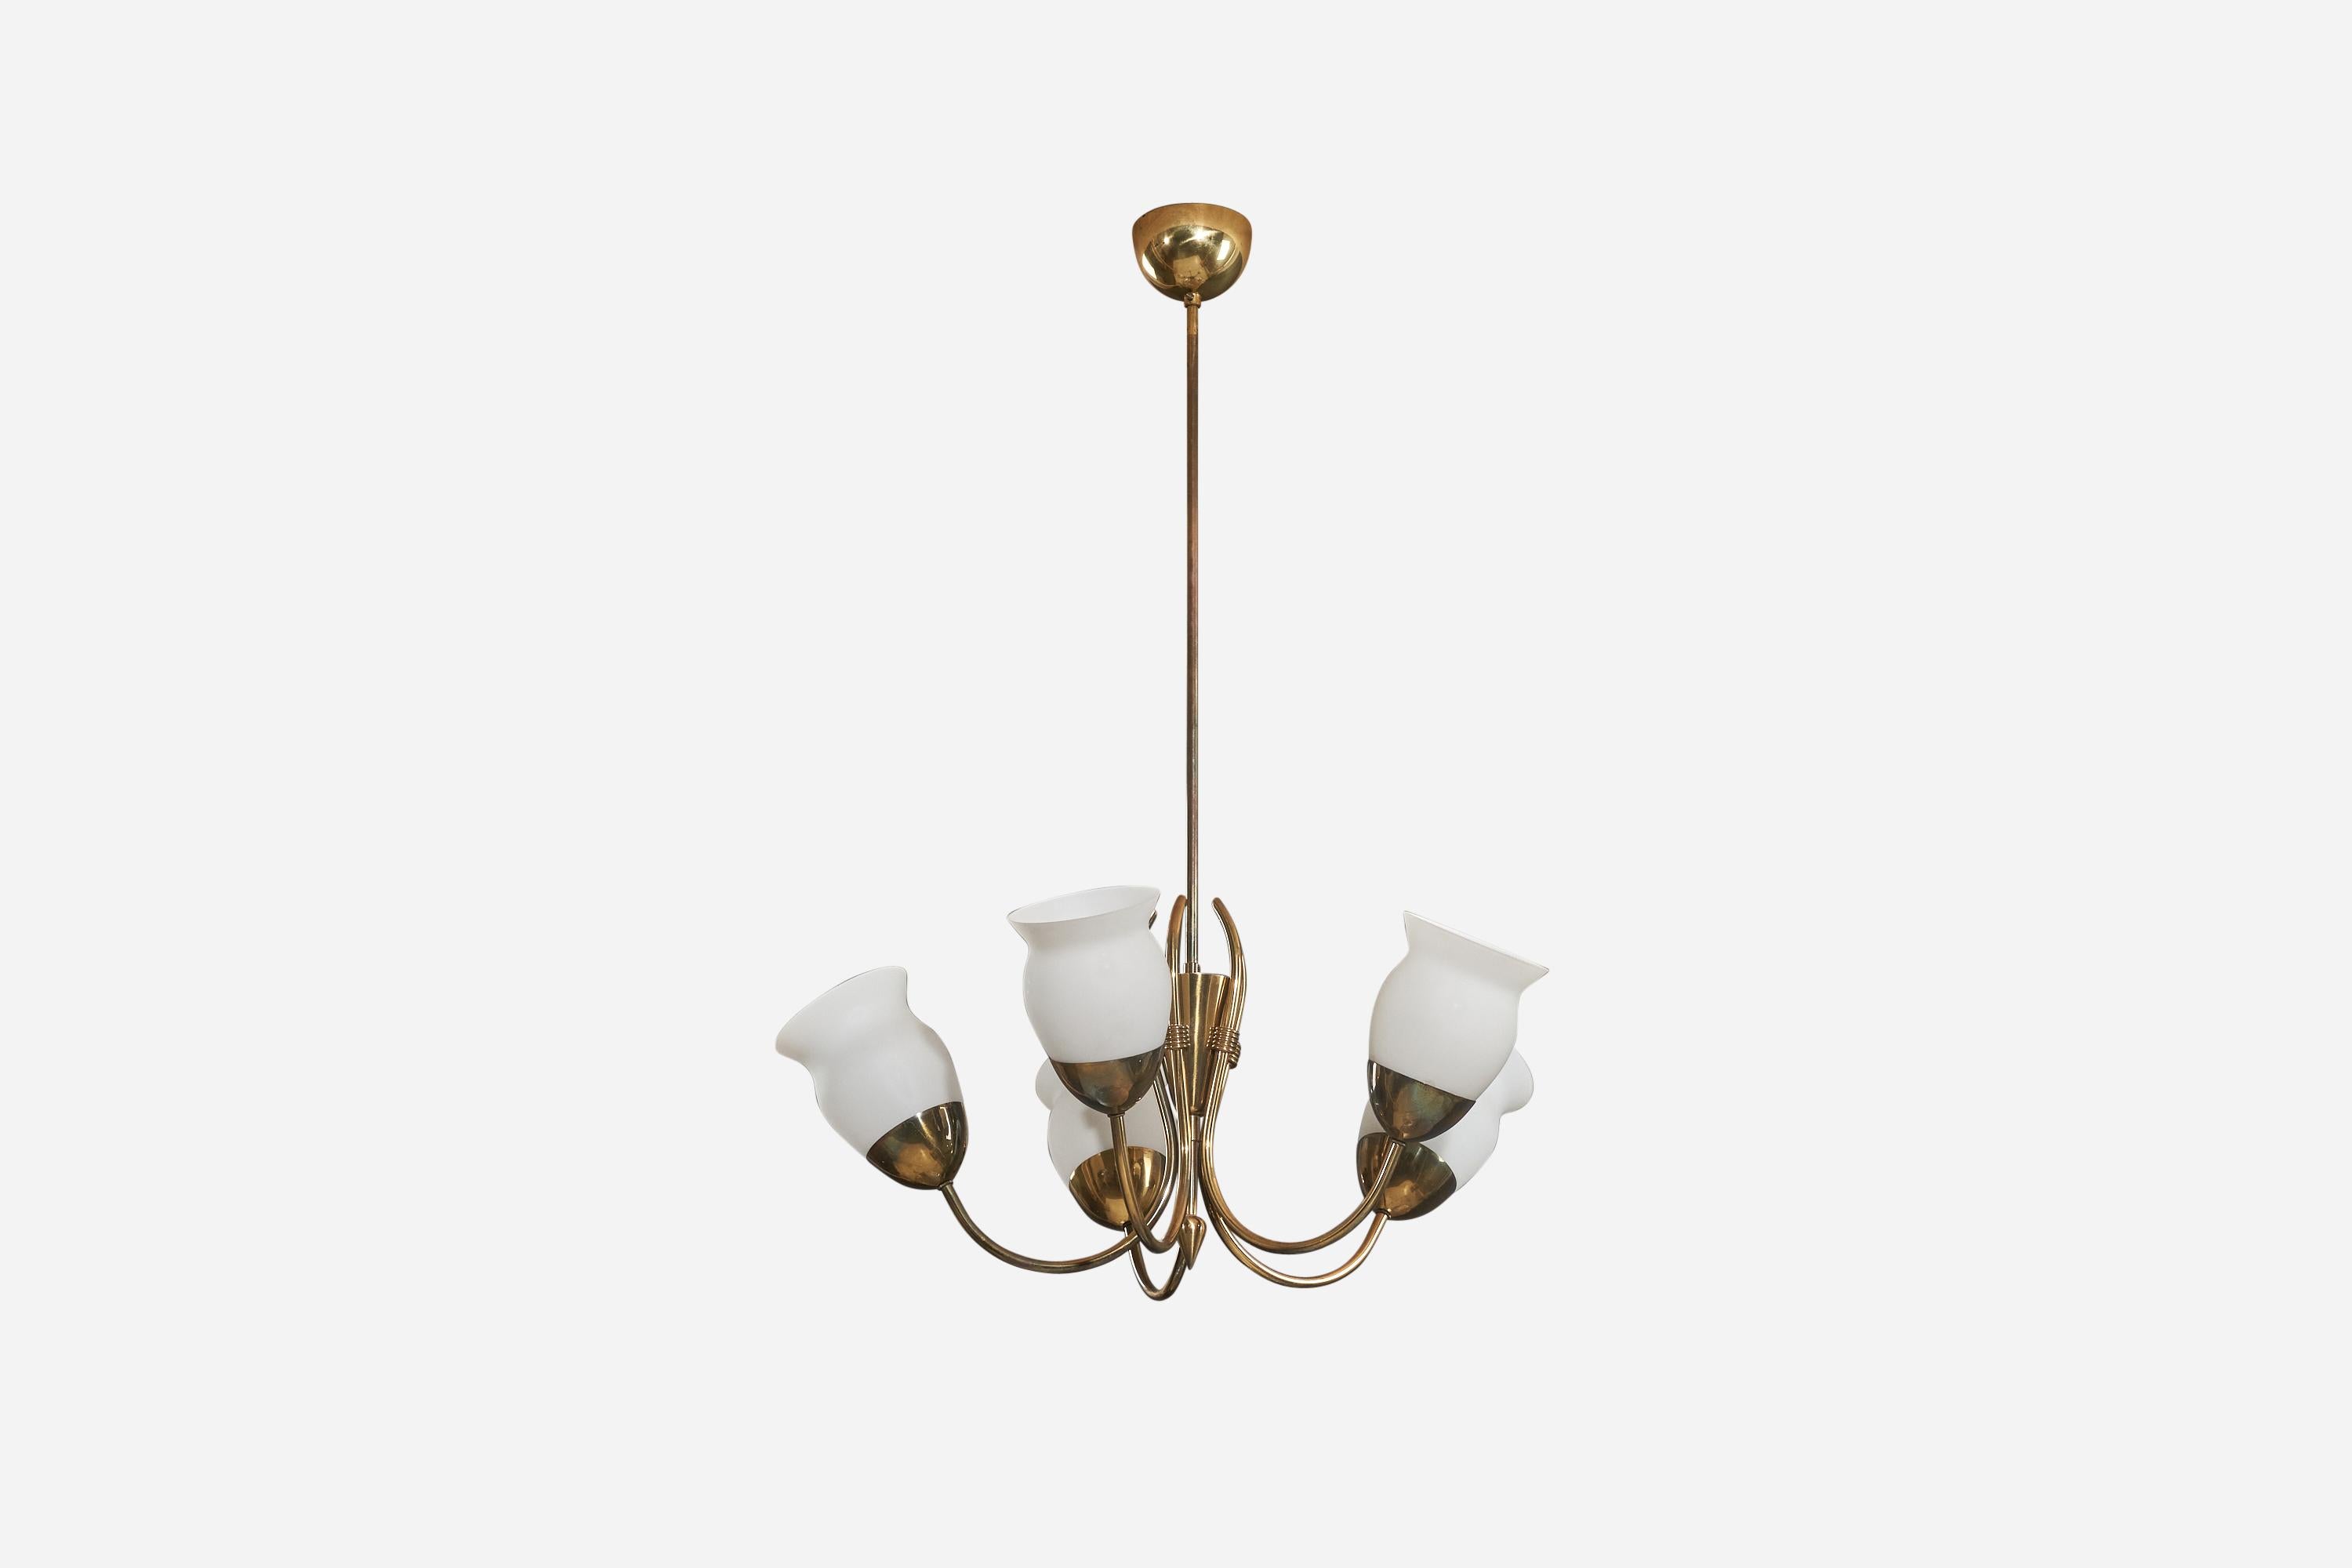 A brass and glass five-armed chandelier designed and produced by Itsu OY, Finland, 1950s. 

Canopy Dimensions (inches): 3 x 4 x 4 (H x W x D).